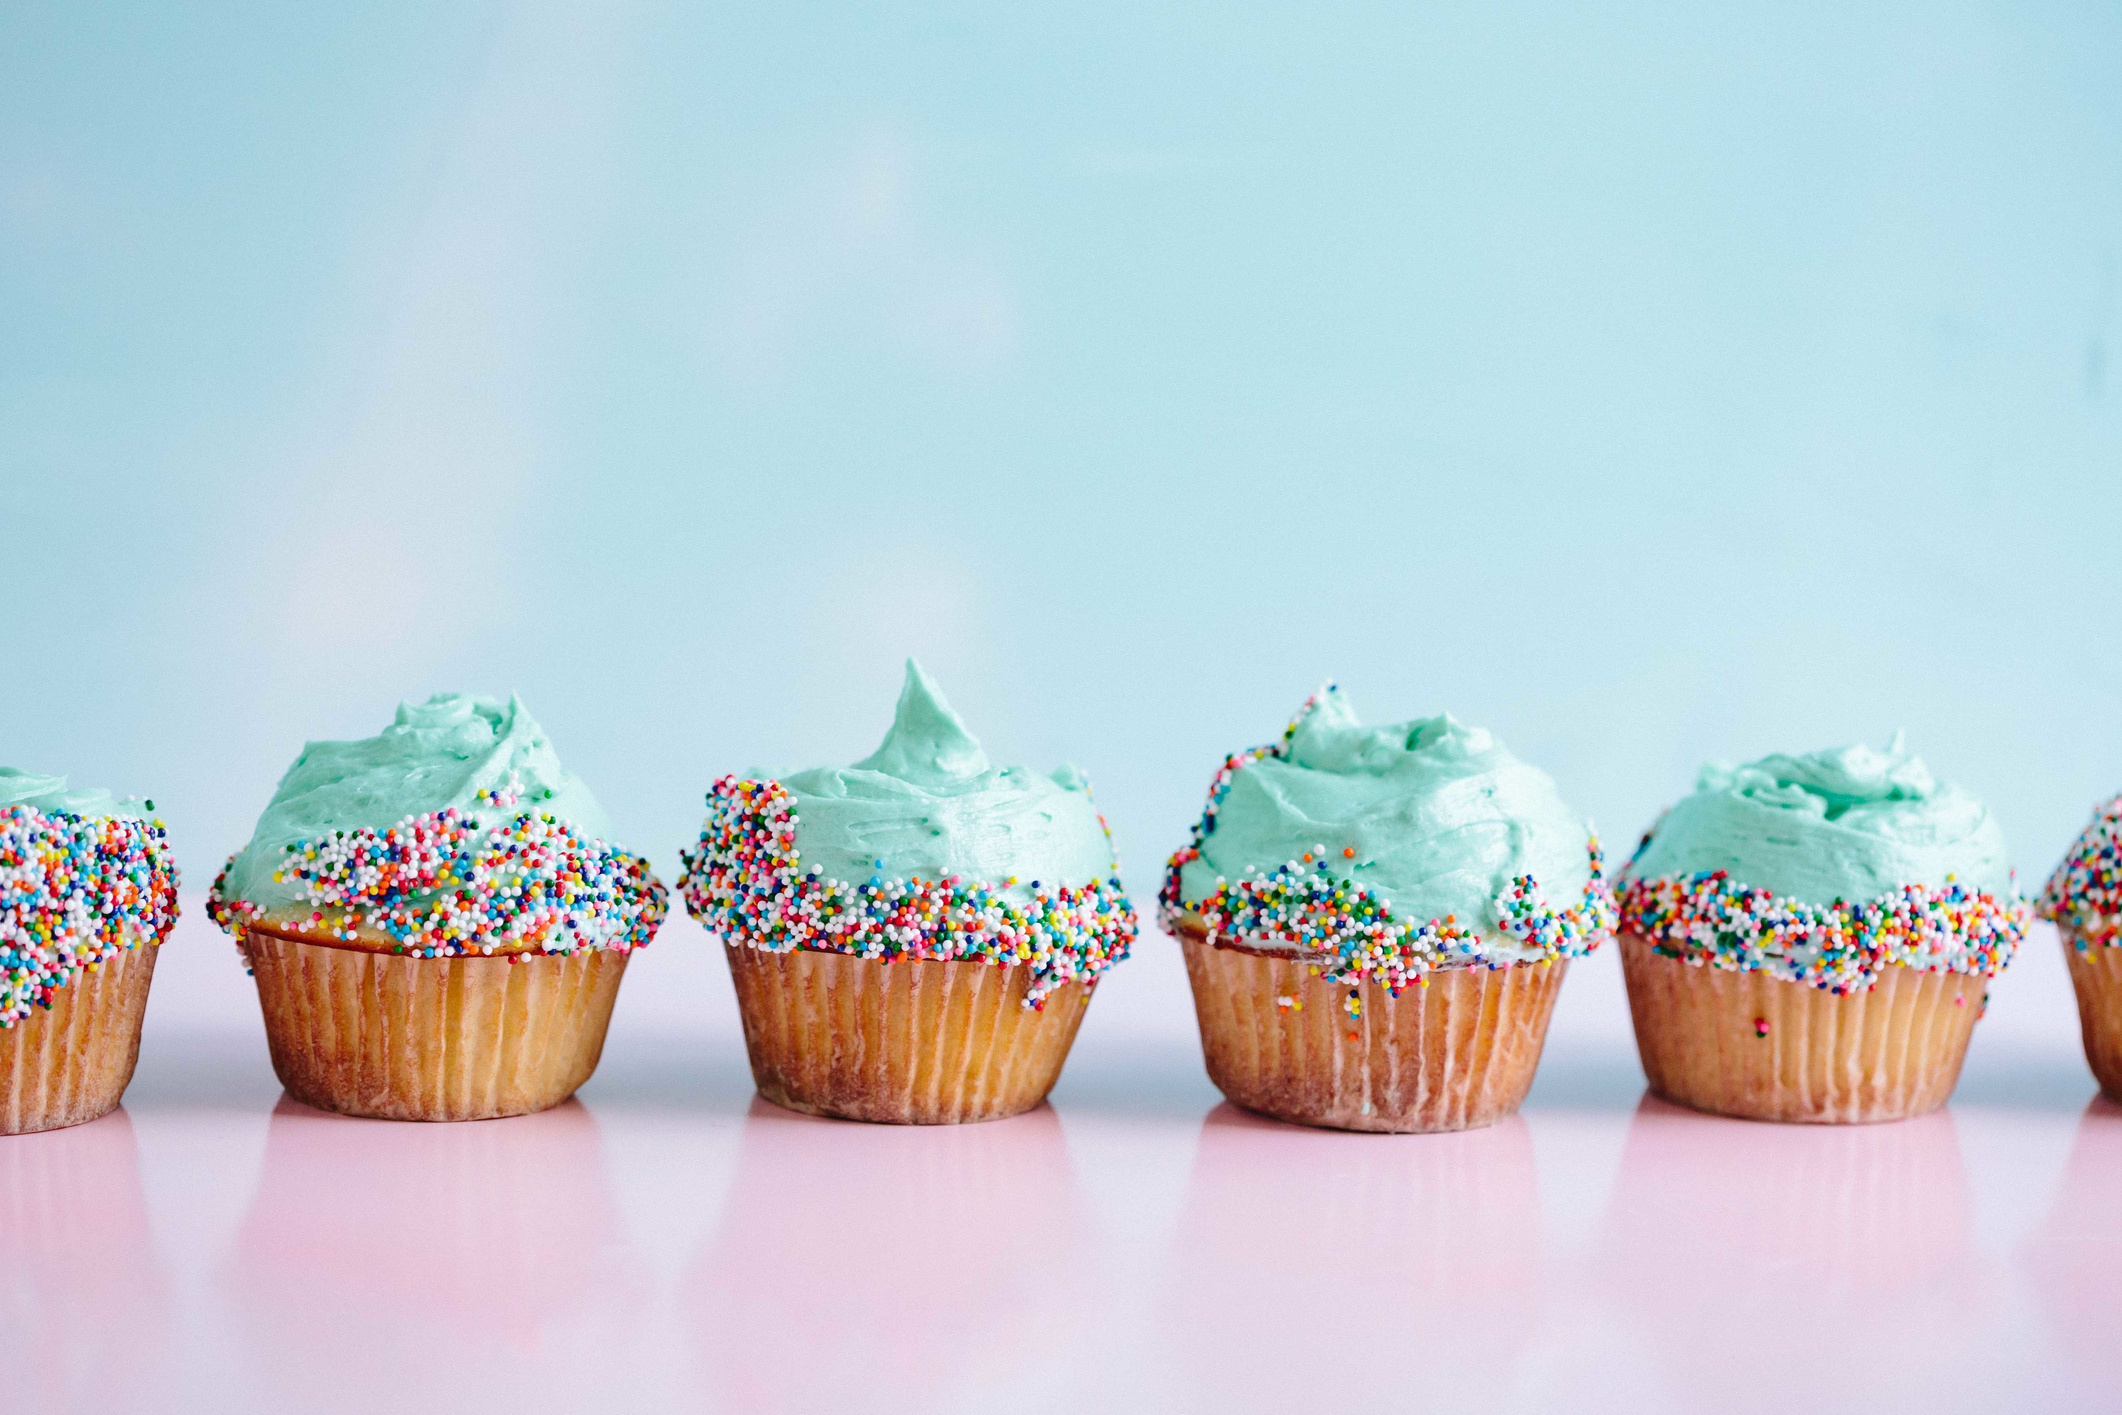 Delicous Cupcakes with Blue Frosting